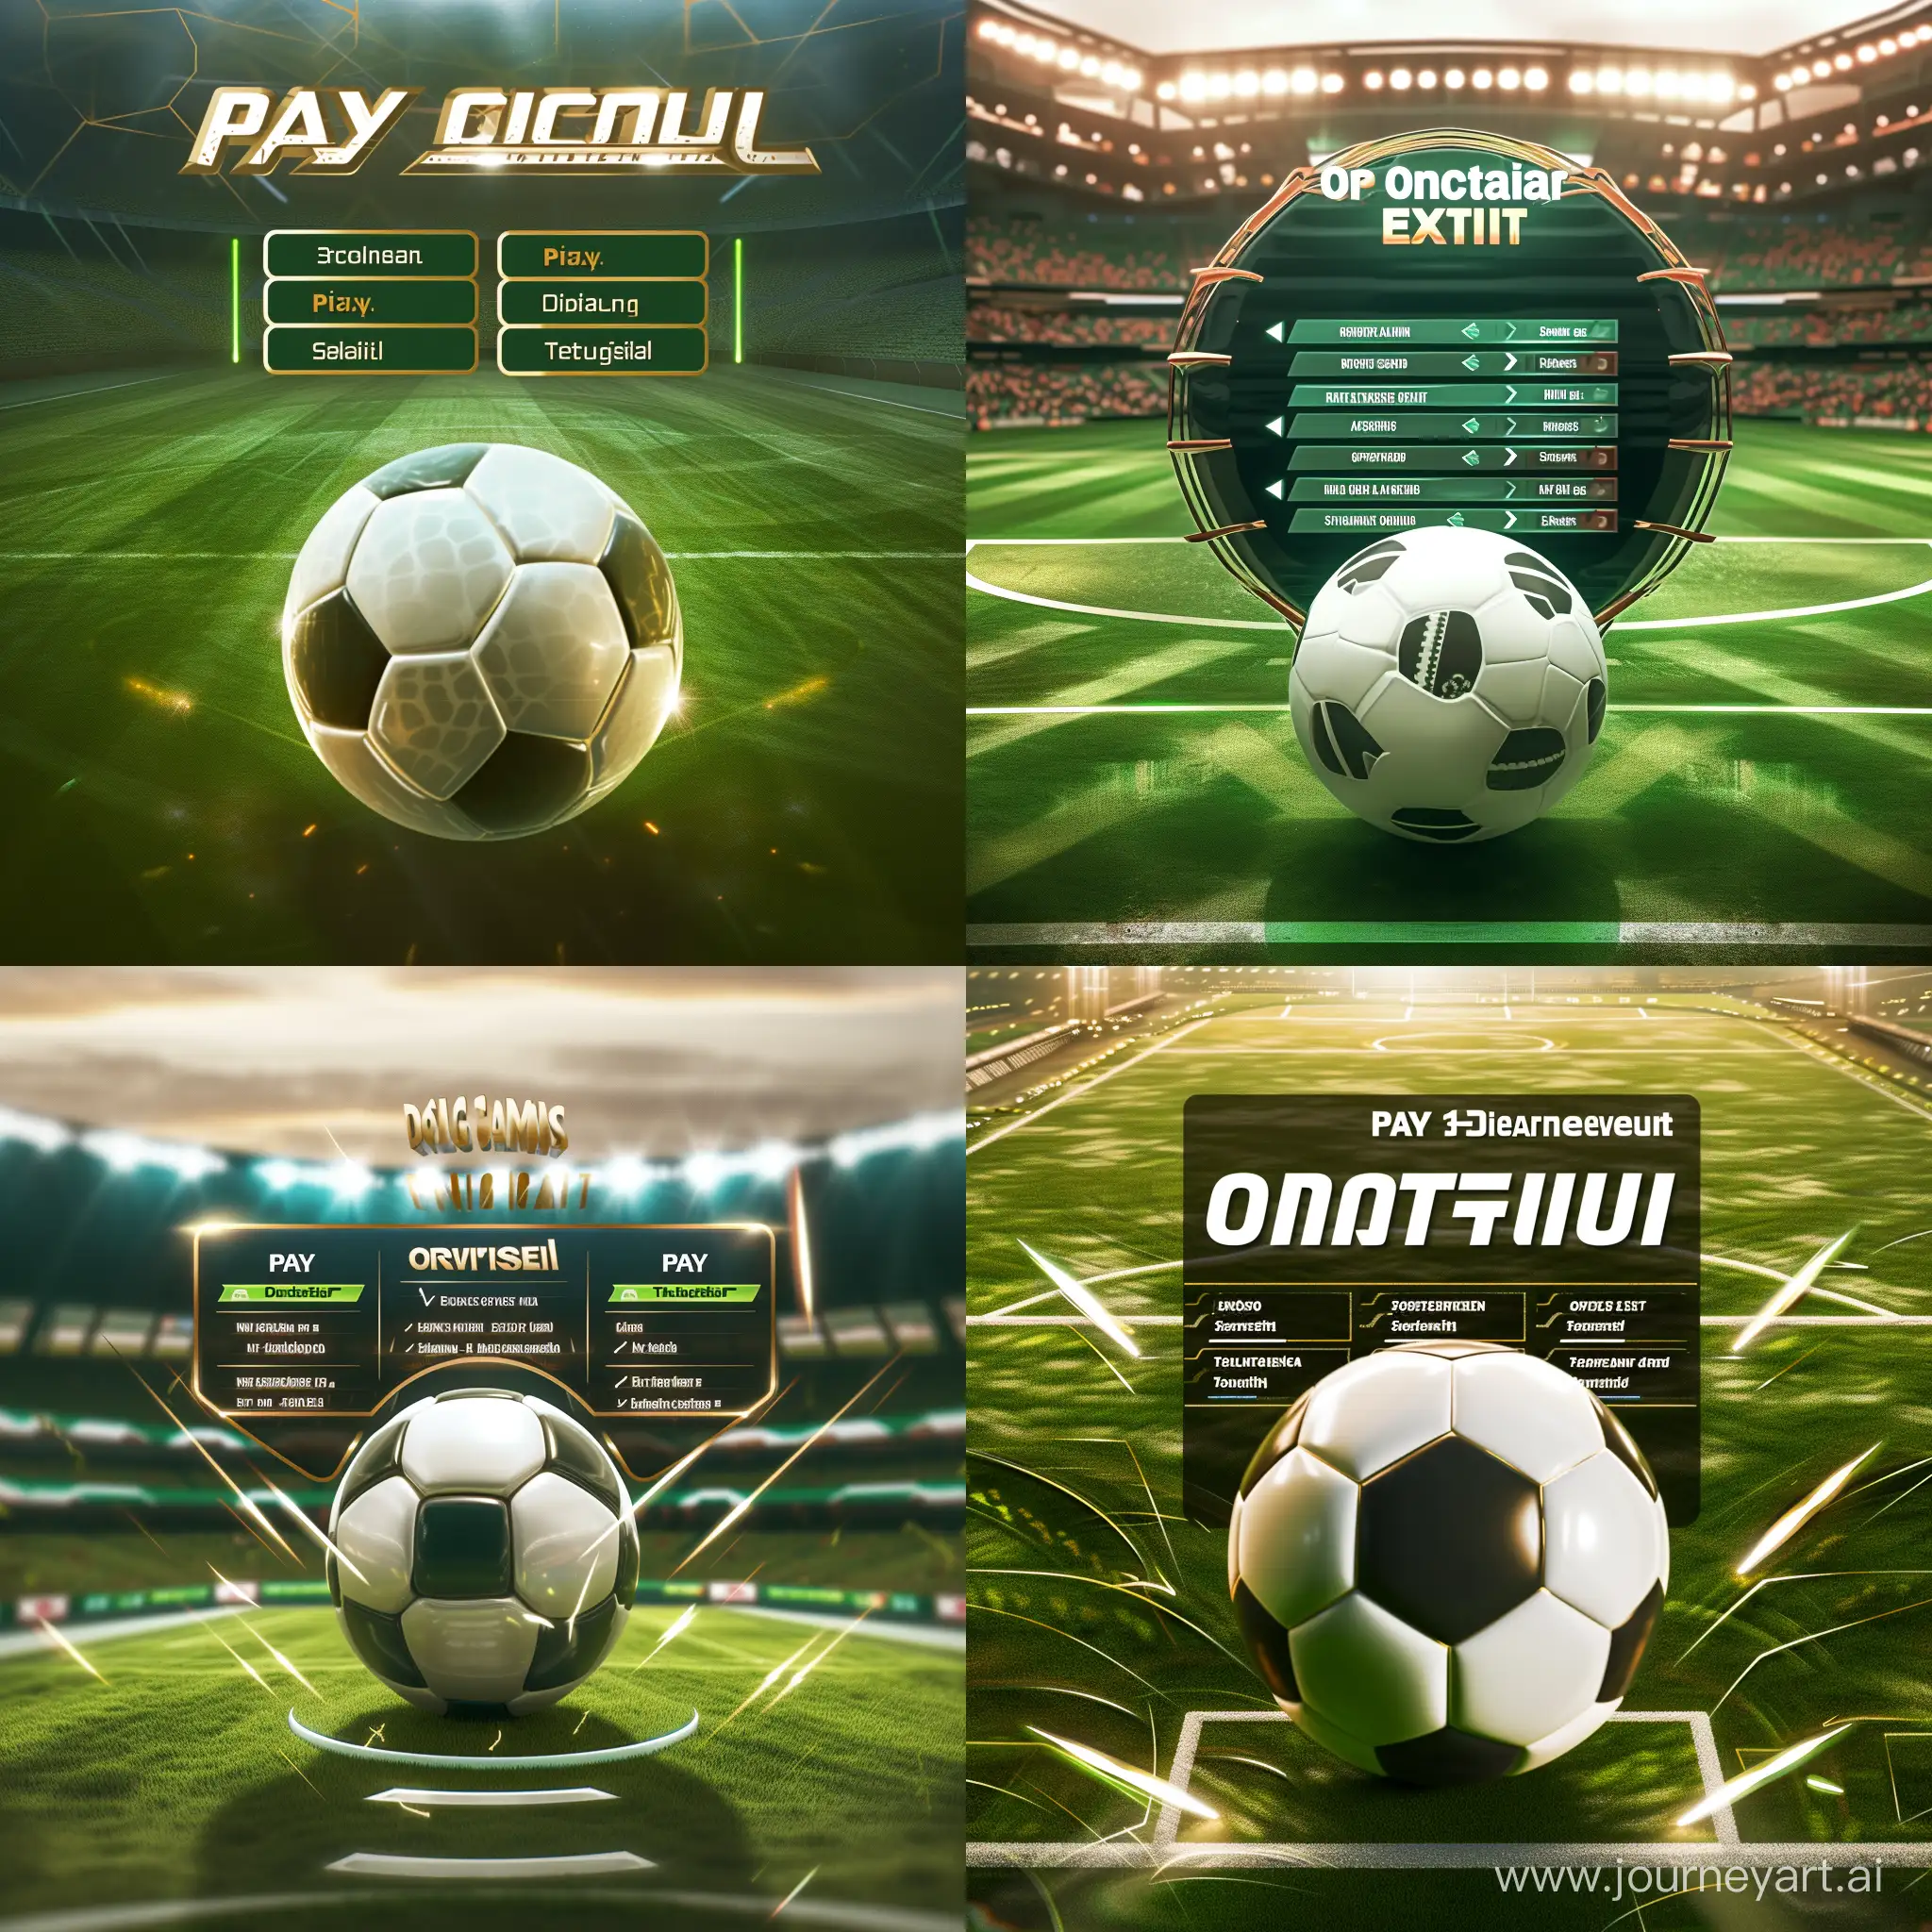 Design the concept art for the main menu screen of a modern PC soccer simulator game. The interface should feature a sleek and sophisticated design, with a photo-realistic grass pitch in the background that exudes the atmosphere of an electrifying match day. The foreground should showcase a 3D-rendered soccer ball at the center. Above the ball, include the game's title in a bold, dynamic font that captures the energy of the sport. Arrange the menu options—'Play', 'Options', 'Tutorial', 'Exit'—in a user-friendly and intuitive layout, using a clean, modern typeface that's easy to read. The color scheme should incorporate vibrant greens and whites, reminiscent of a soccer field, with subtle accents of gold to suggest a premium gaming experience. Apply subtle lighting effects to create depth and focus on the soccer ball and title, making them the focal points of the screen. The overall aesthetic should be high-tech yet welcoming, inviting players to dive into the virtual soccer experience.